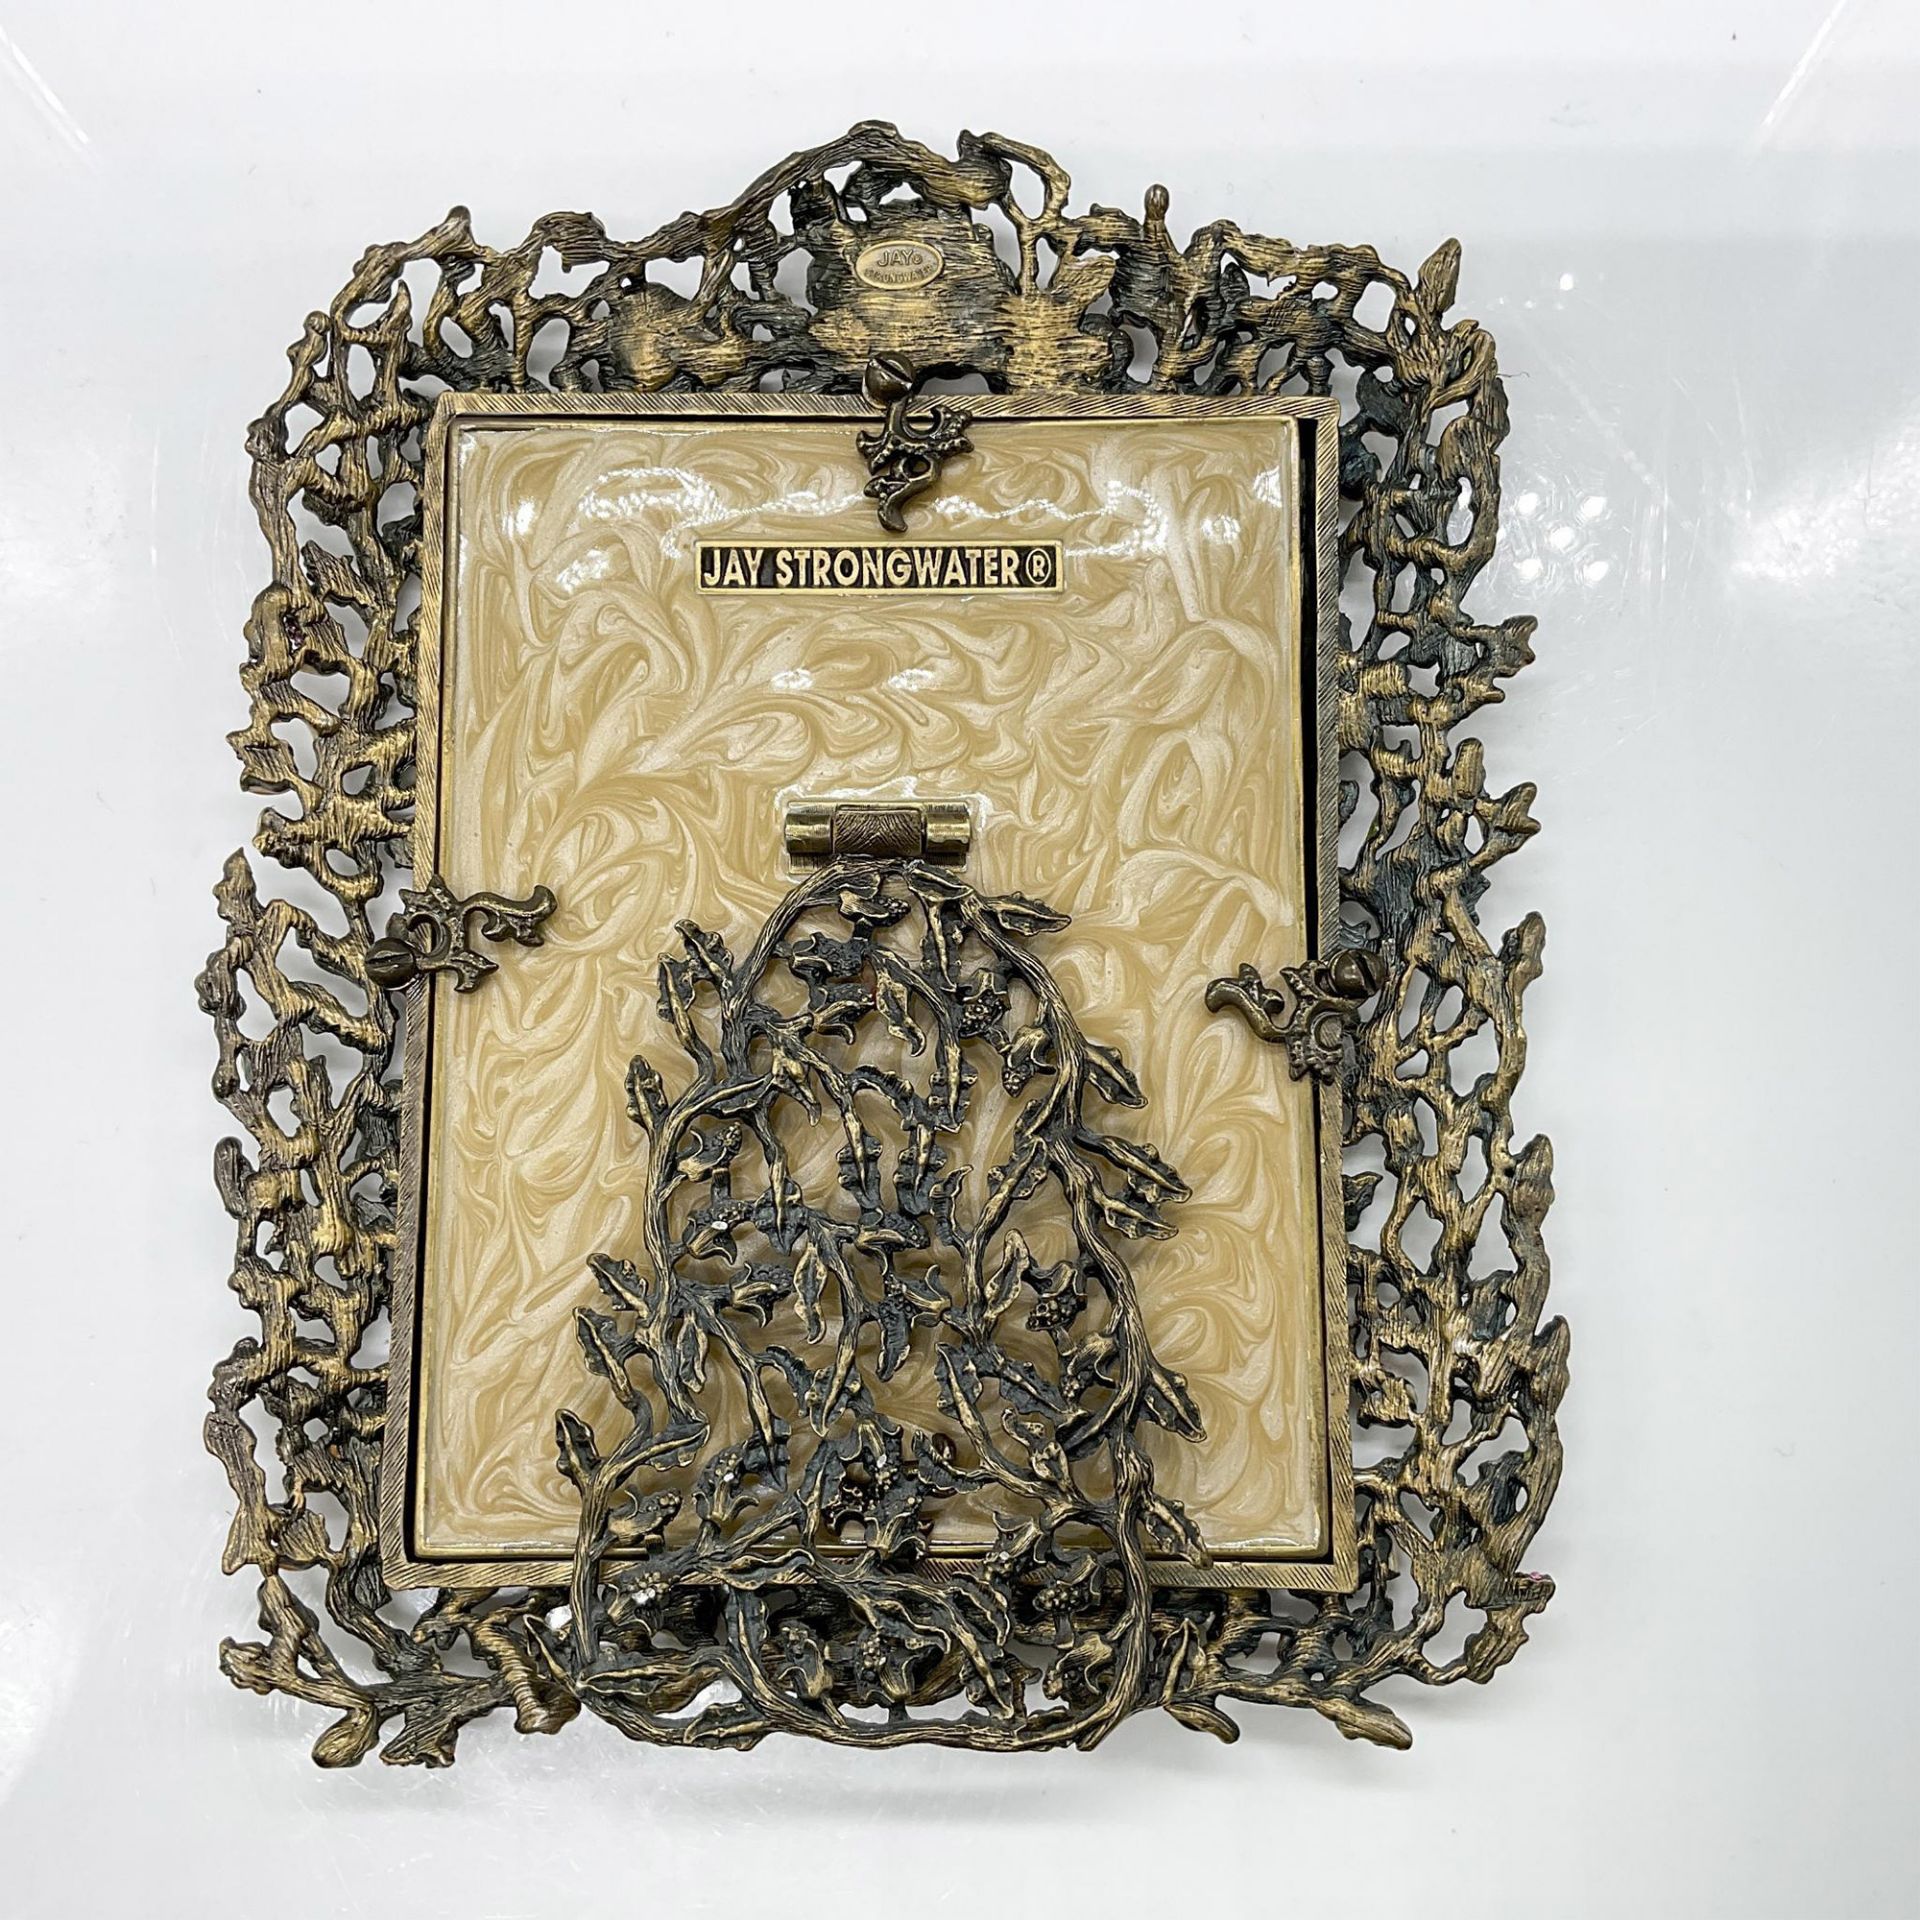 Jay Strongwater Enamel and Crystal Picture Frame - Image 3 of 3